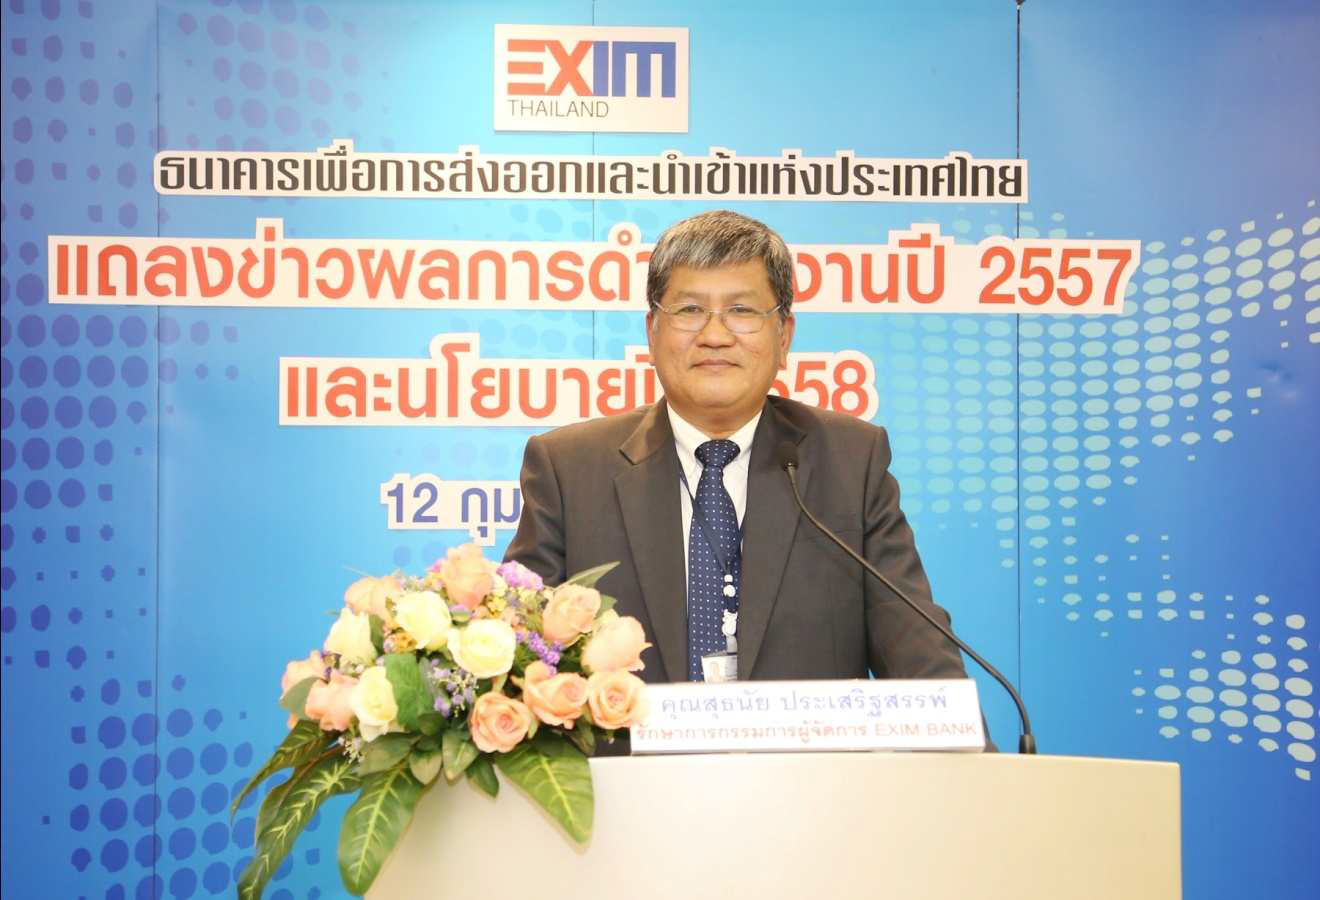 EXIM Thailand Announces 2014 Operating Results, 2015 Business Policy and Five New Products